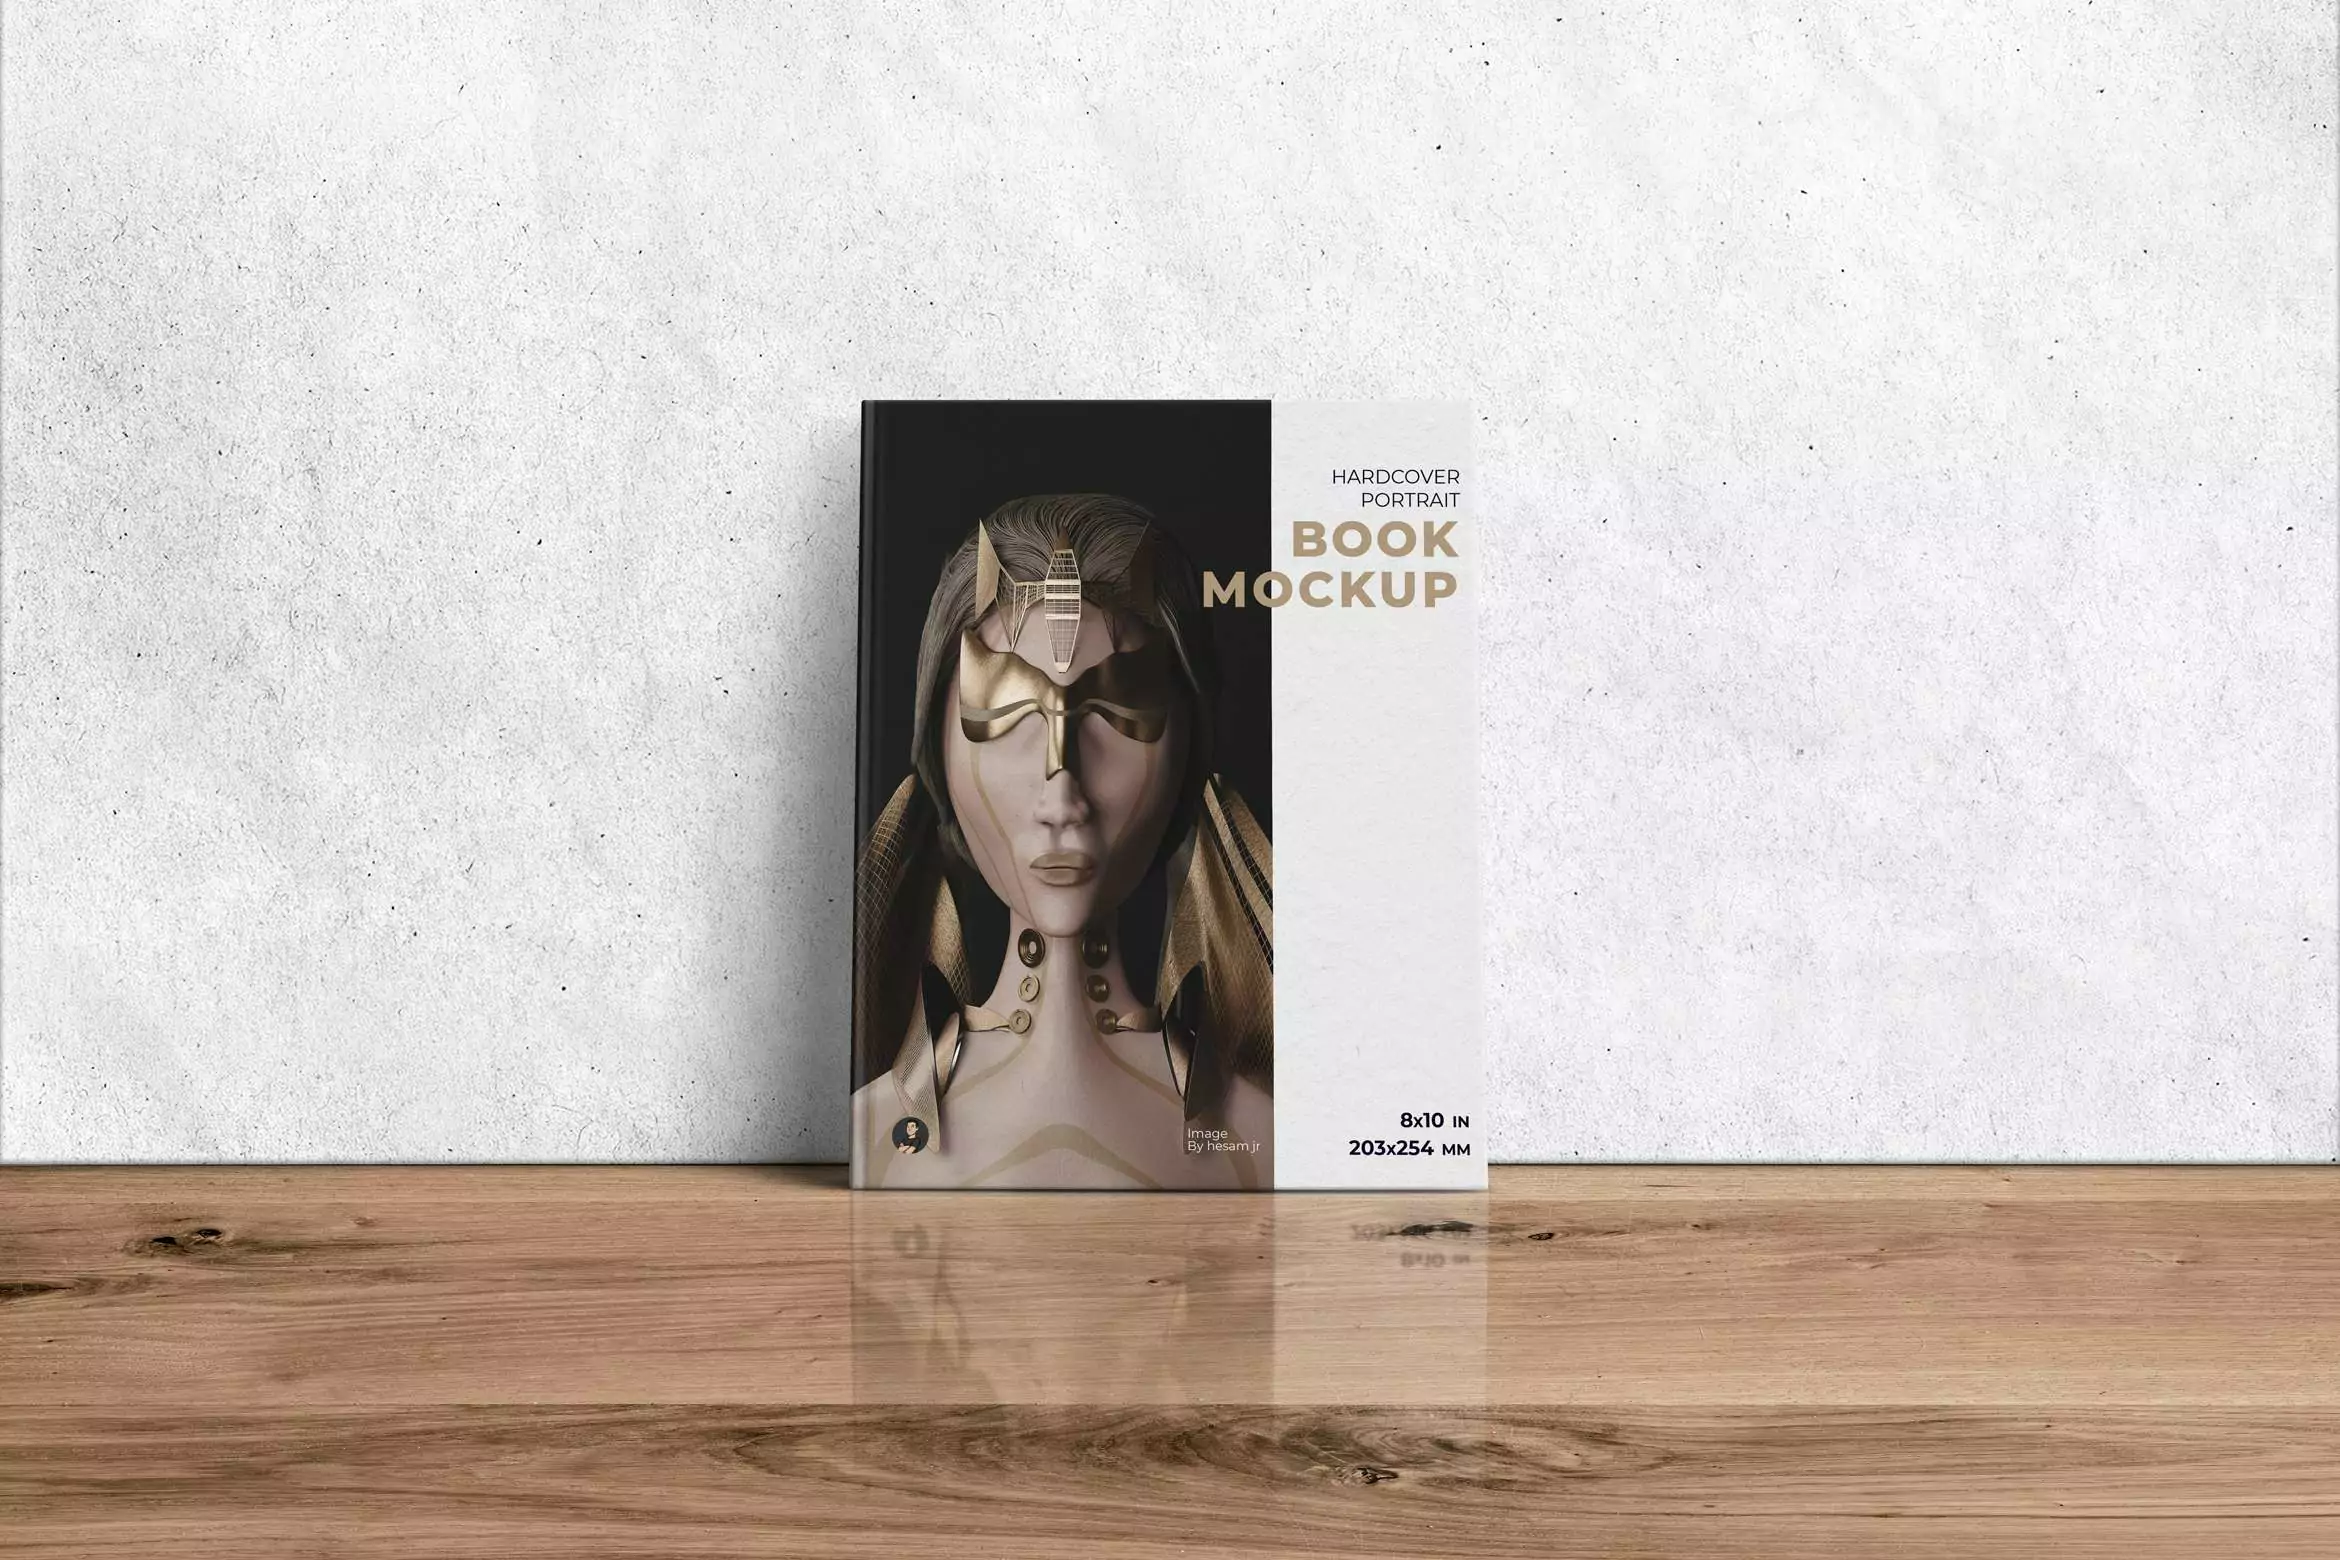 Leaning on Wall Portrait Book Mockup - 8x10 in